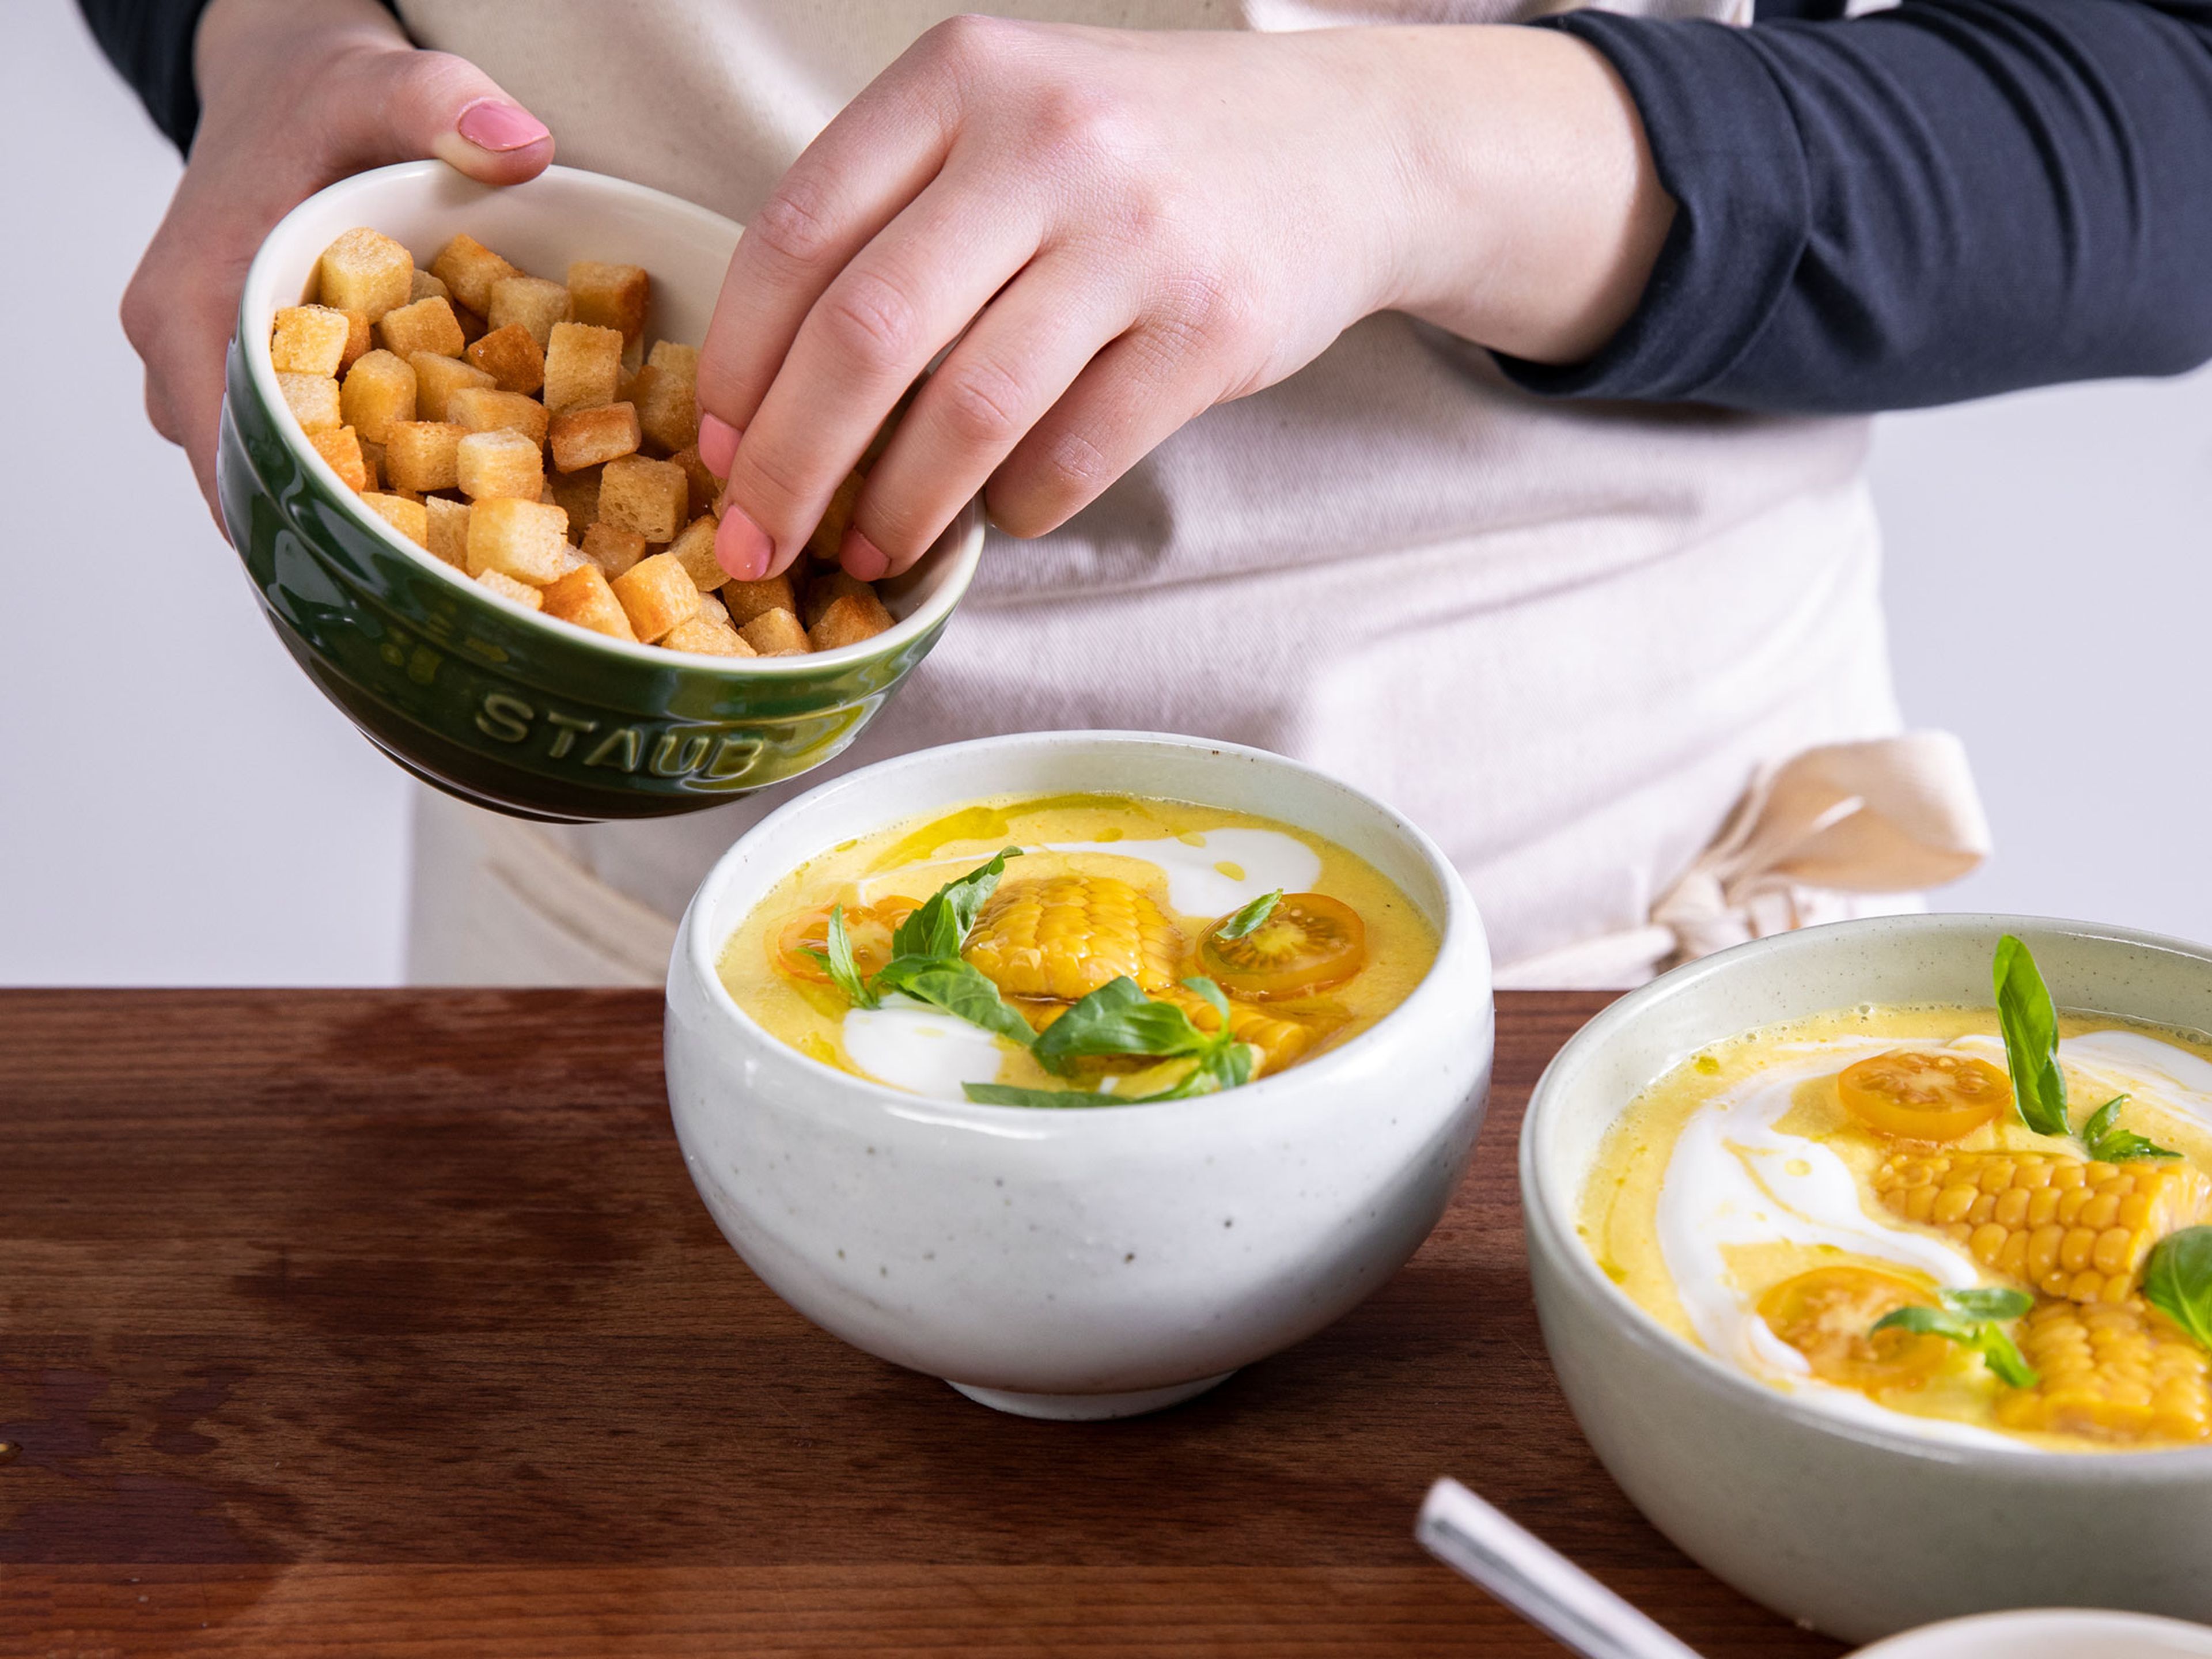 Cut corn kernels from remaining cob and halve yellow tomatoes for serving. Serve gazpacho in bowls with corn, tomatoes, fresh basil leaves, and croutons. Drizzle with yogurt and olive oil. Enjoy!